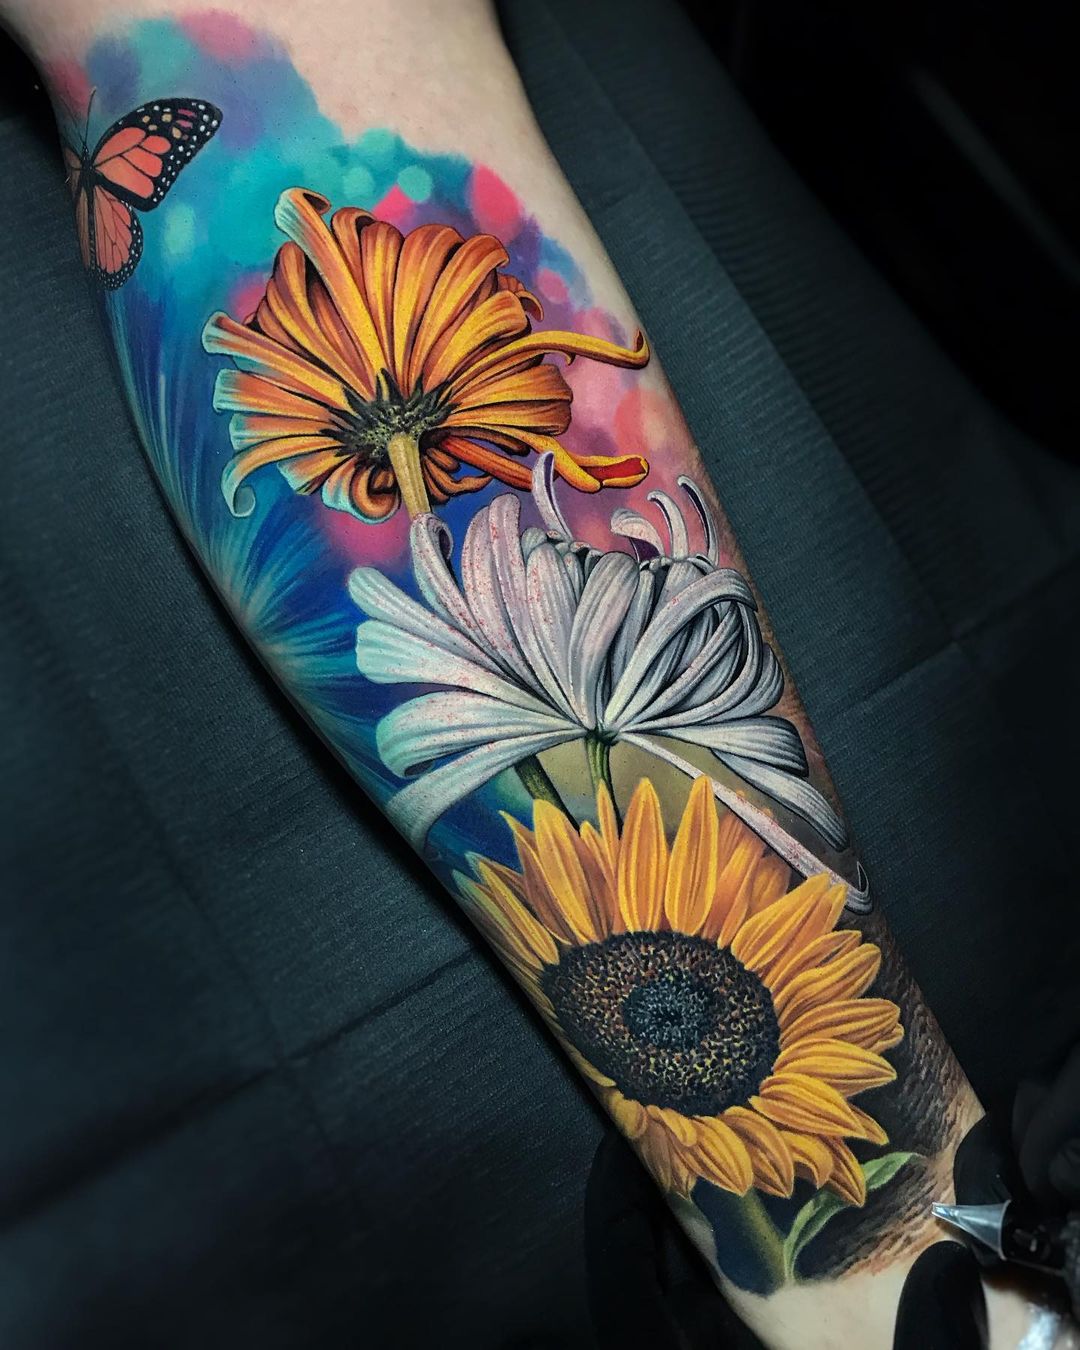 The Radiant Sunflower Tattoo: Symbolism, Design, and More - Monster Ink  Tattoo